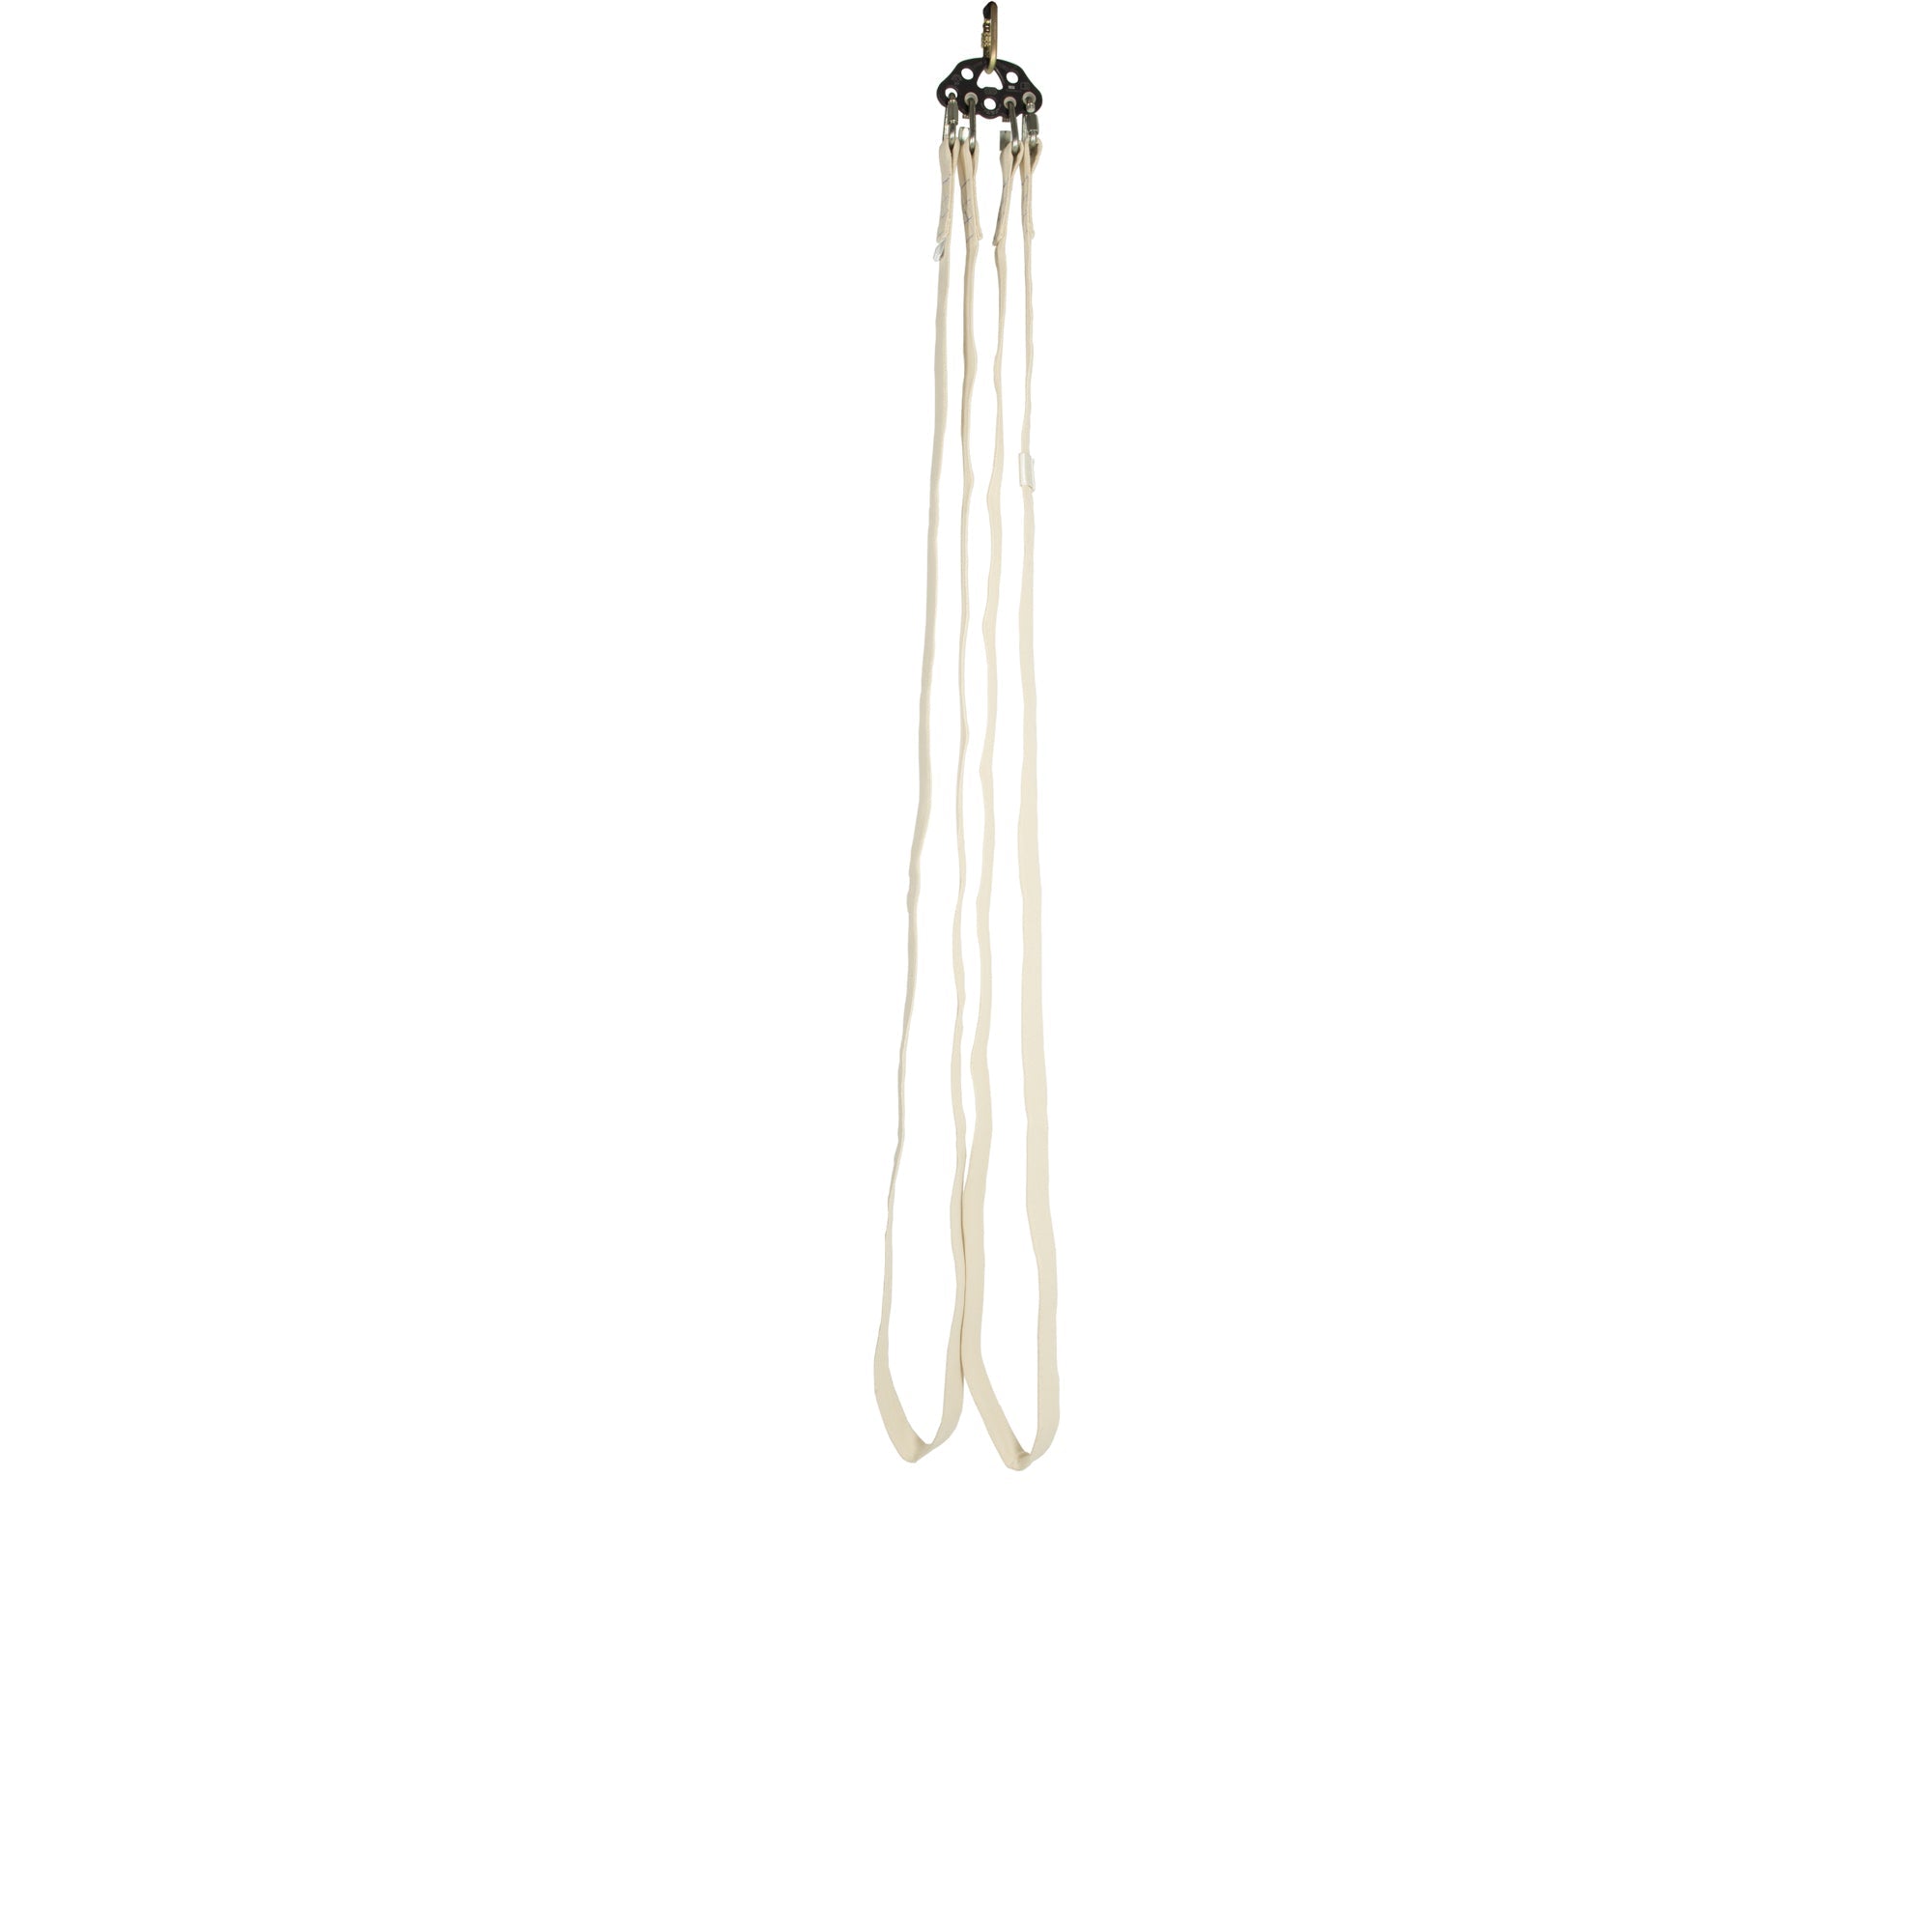 Prodigy cotton covered aerial loops - 200cm rigged